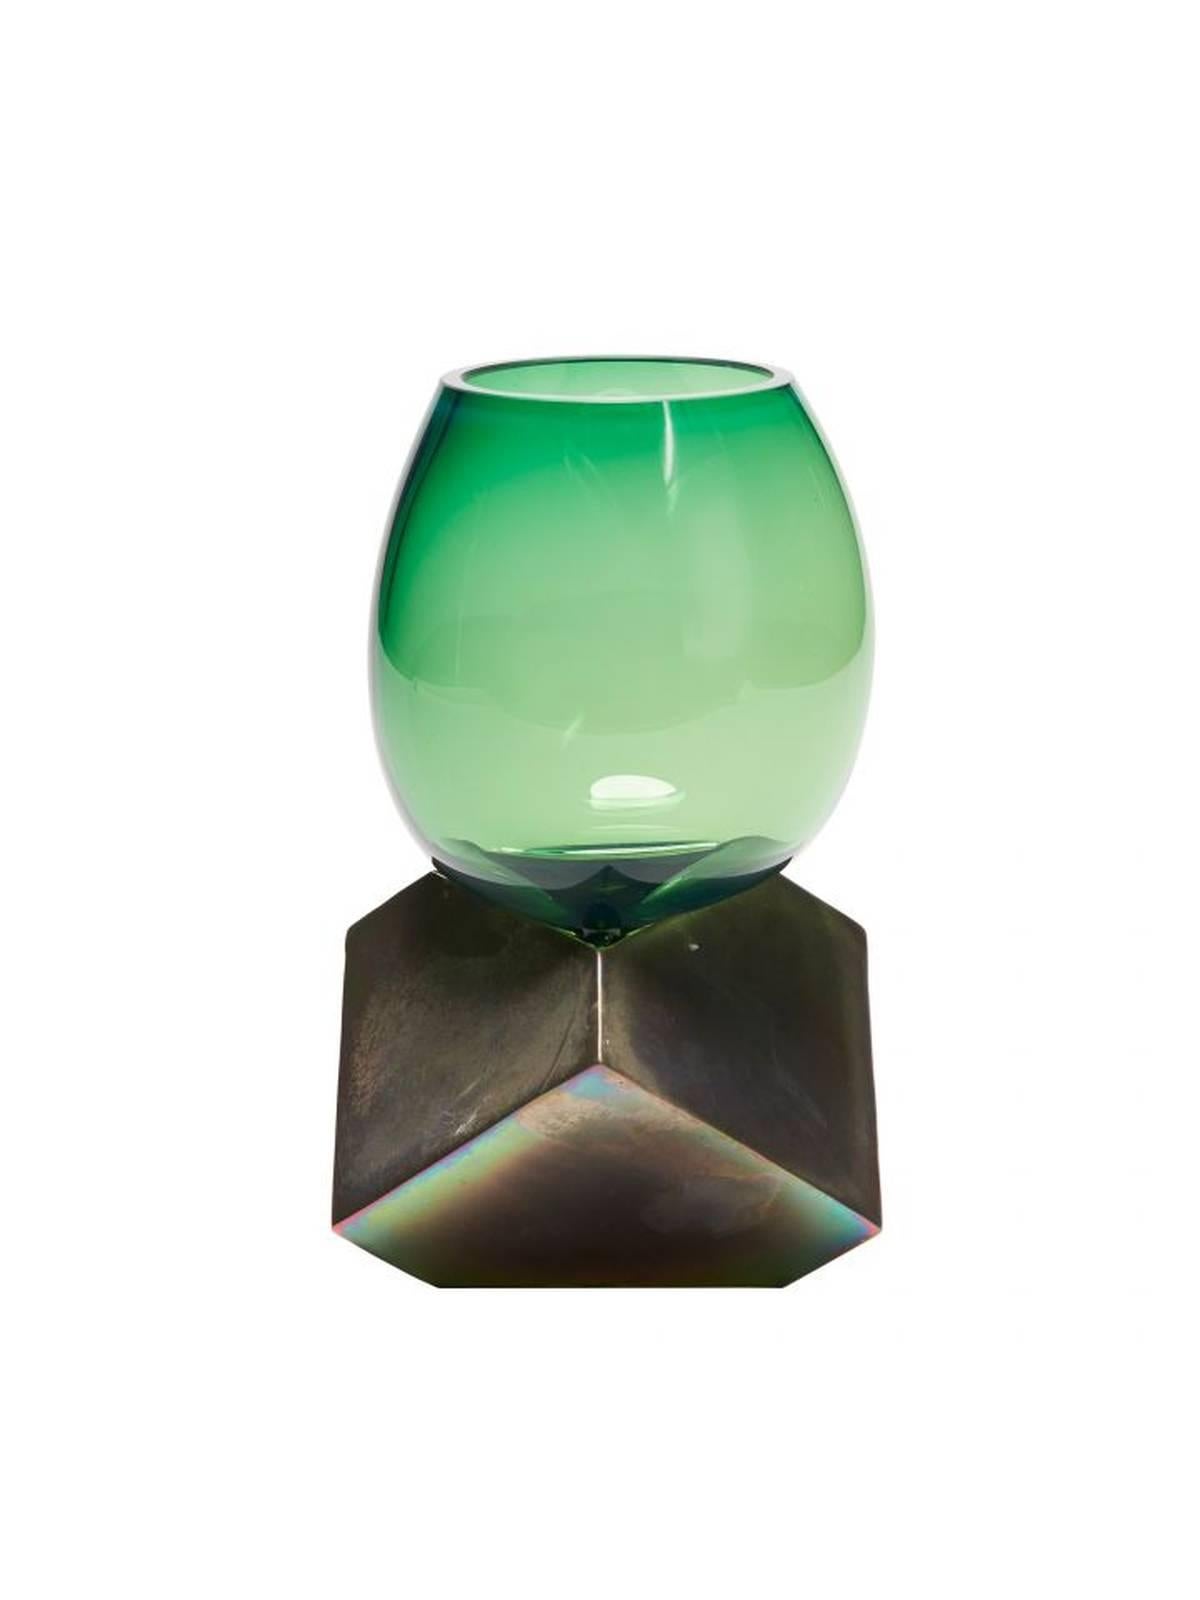 An artisanal green glass vase, blown without a mold. Subtle bubbles are a testament to its handmade origin. Rests on a bronze base. Made to order, each piece slightly unique. Made in France.